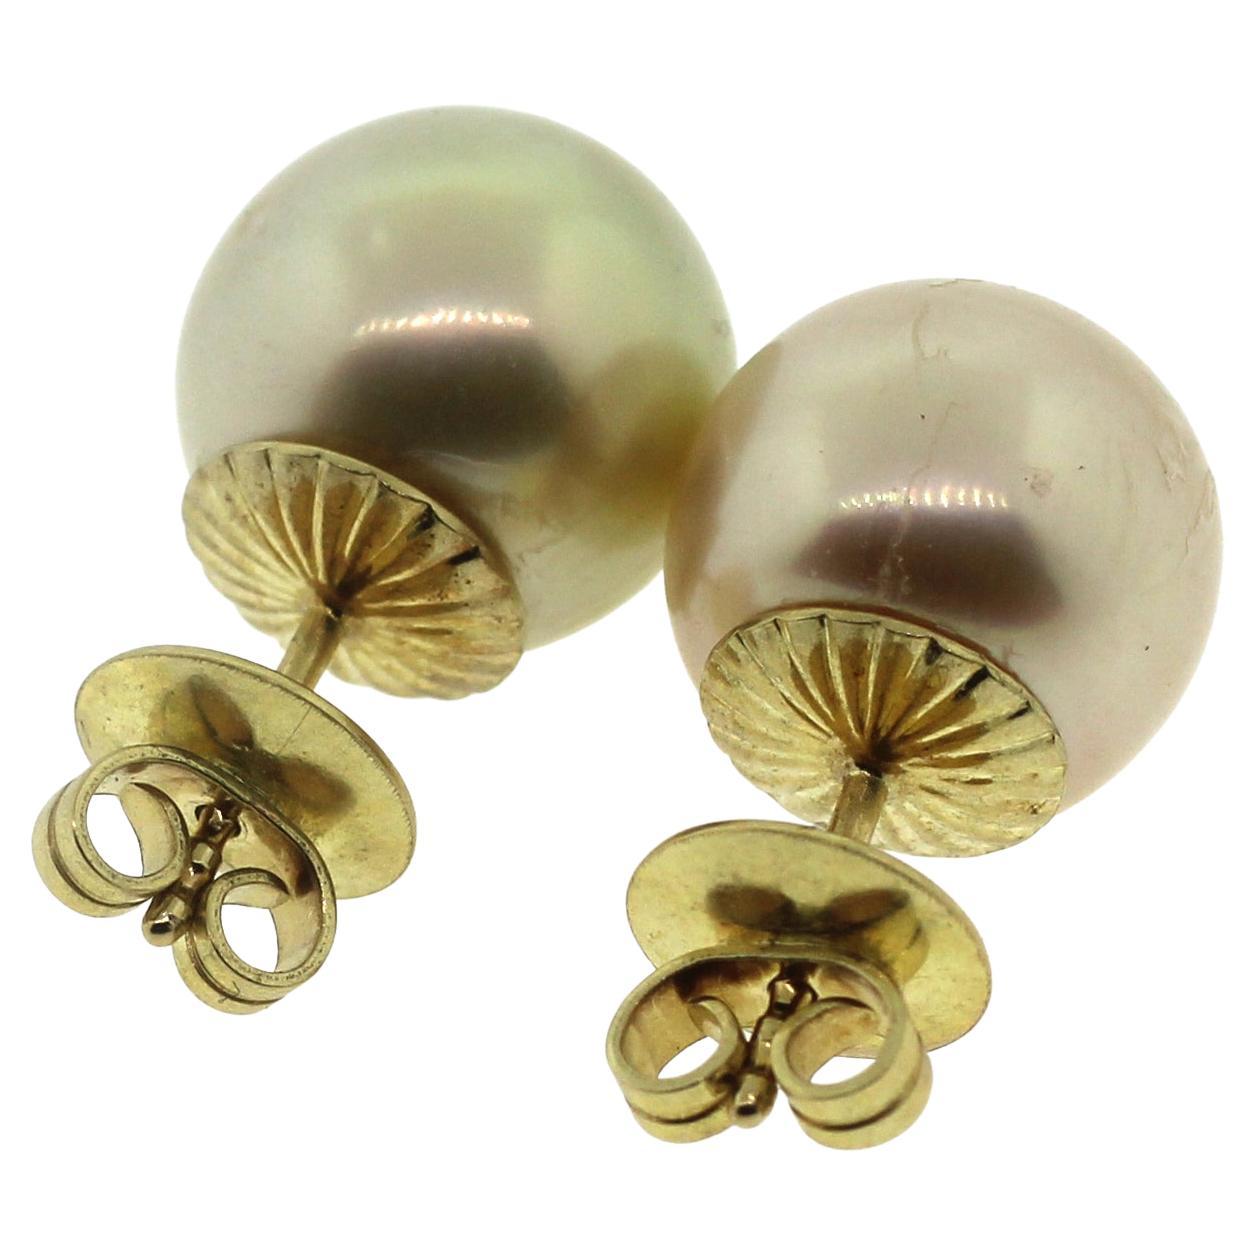 Hakimoto By Jewel Of Ocean
18K Yellow Gold
Natural Color South Sea Pearl Stud Earrings.
Hight 0.86 inch
Total item weight 6.8 grams
12mm Natural color South Sea Cultured Pearls
18K Yellow Gold High Polish
Orient: Good
Luster: Good
Surface: Small